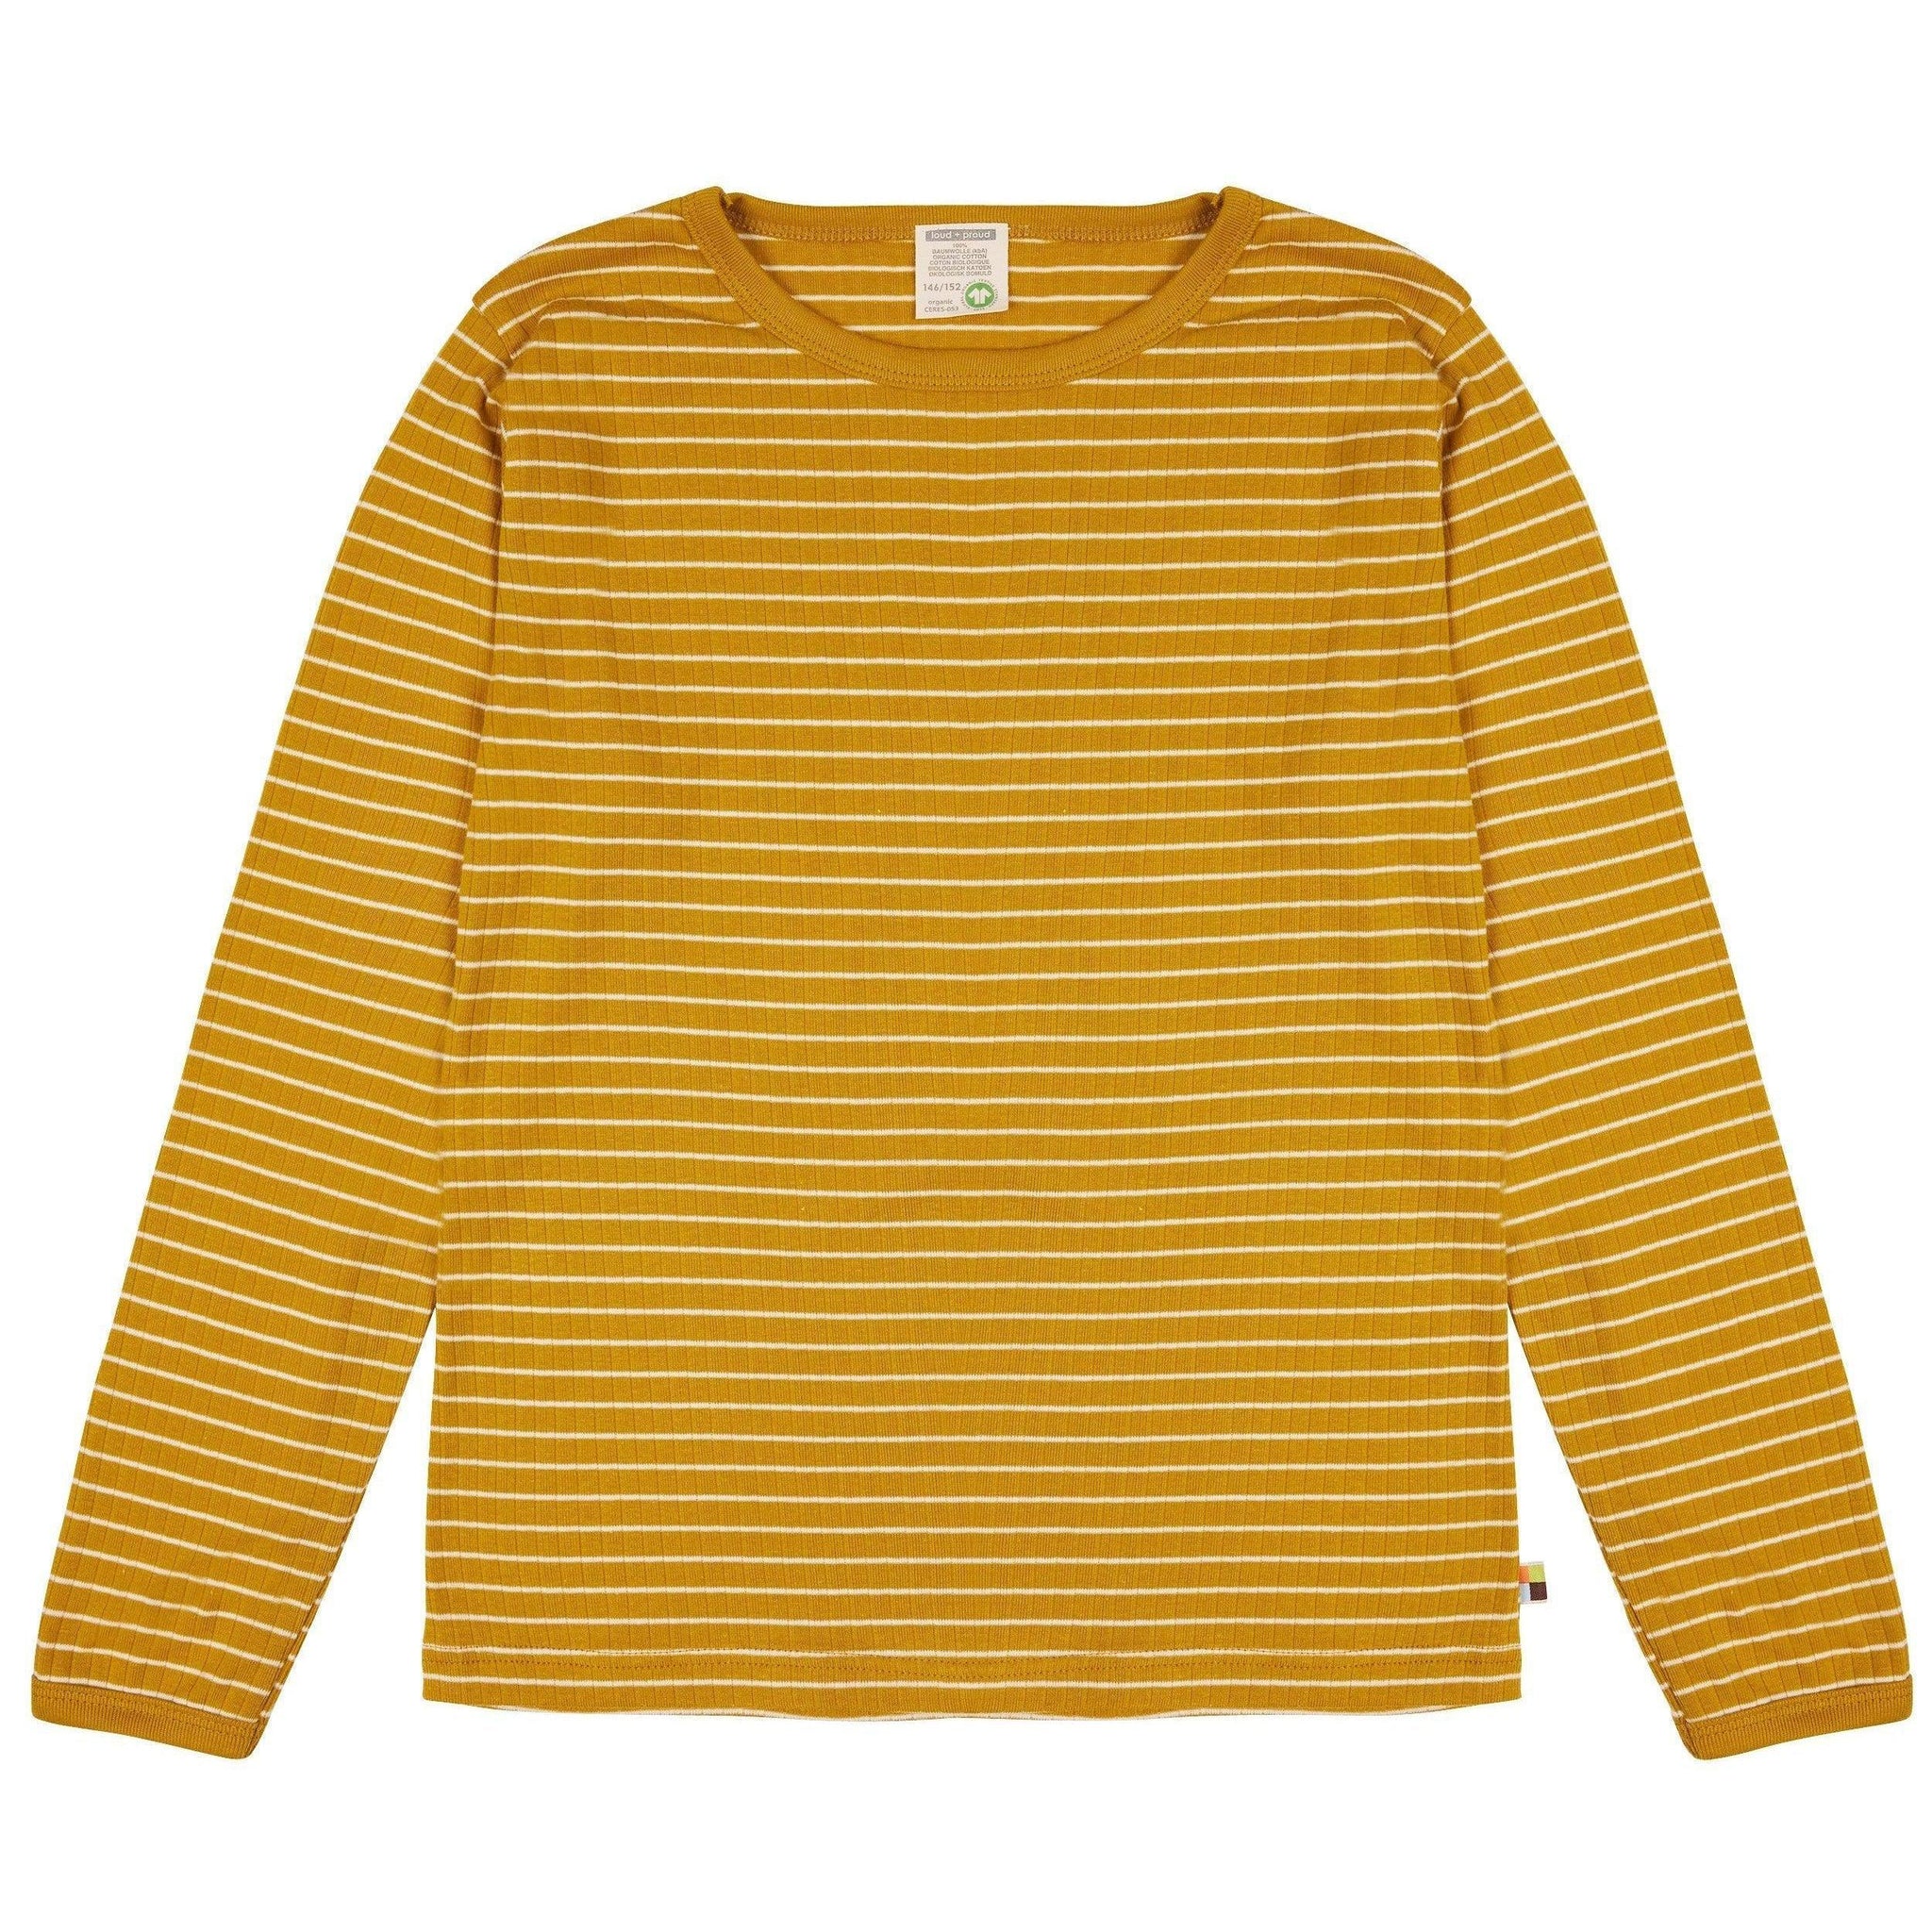 Loud + Proud - Curry Long Sleeved Striped Top